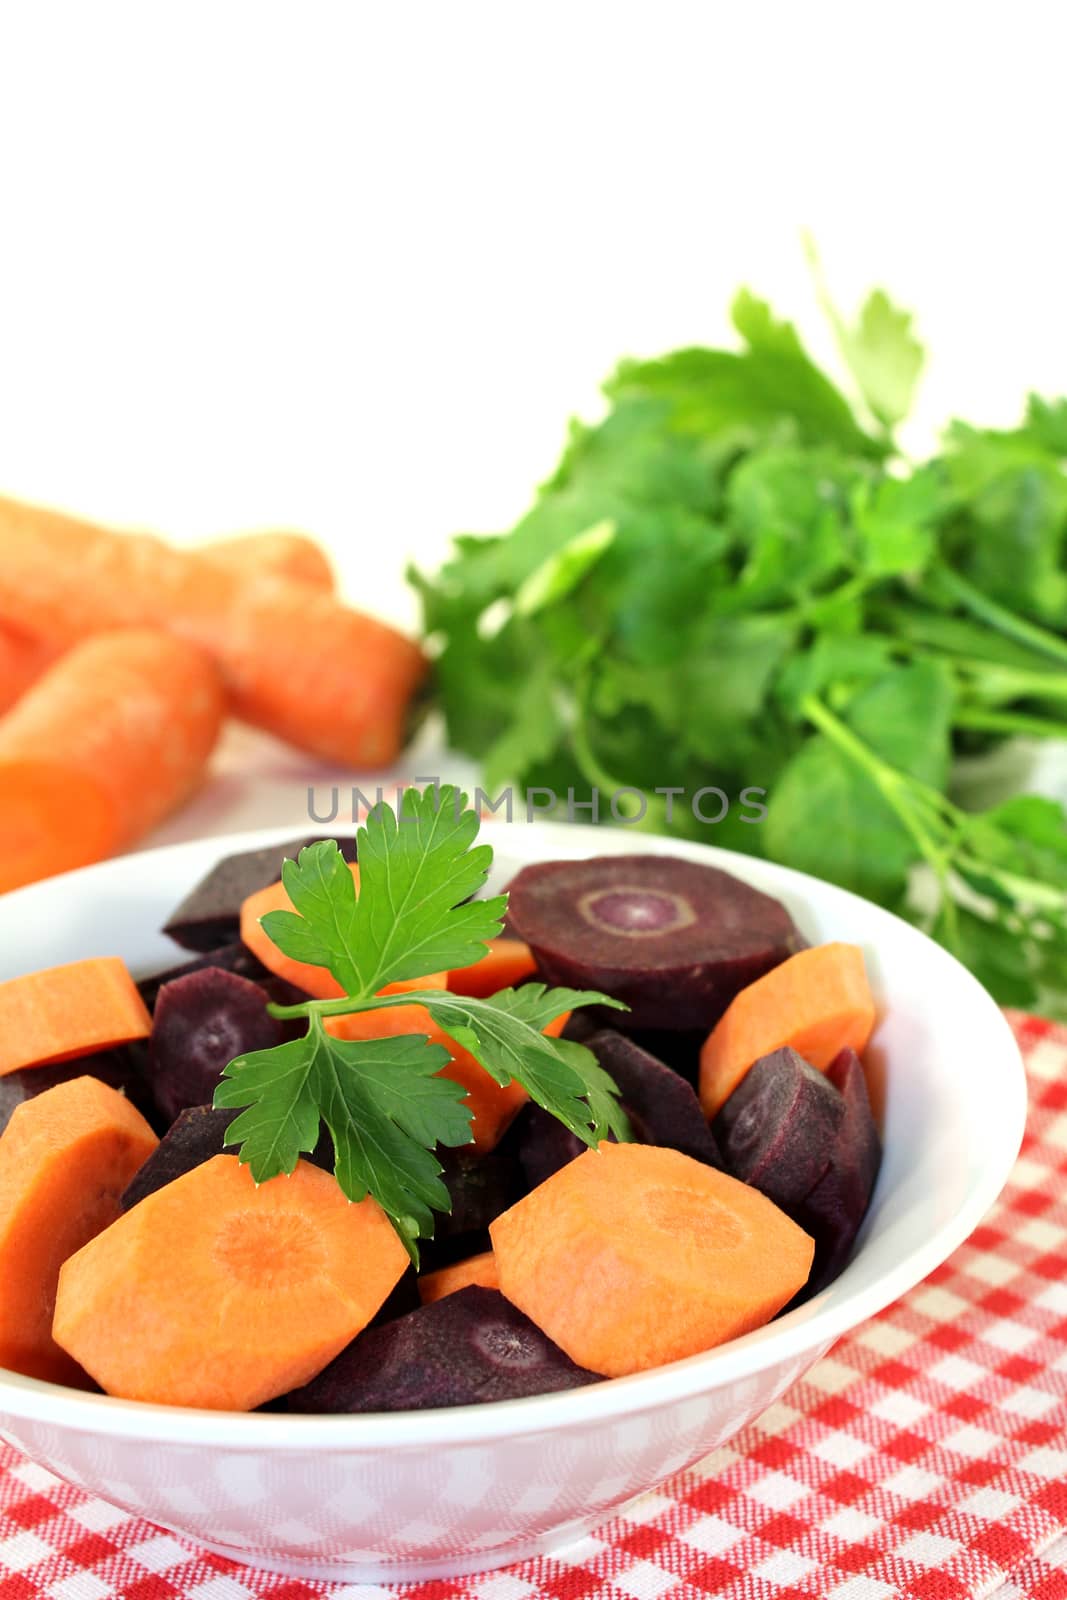 orange and purple carrots with green parsley on a light background